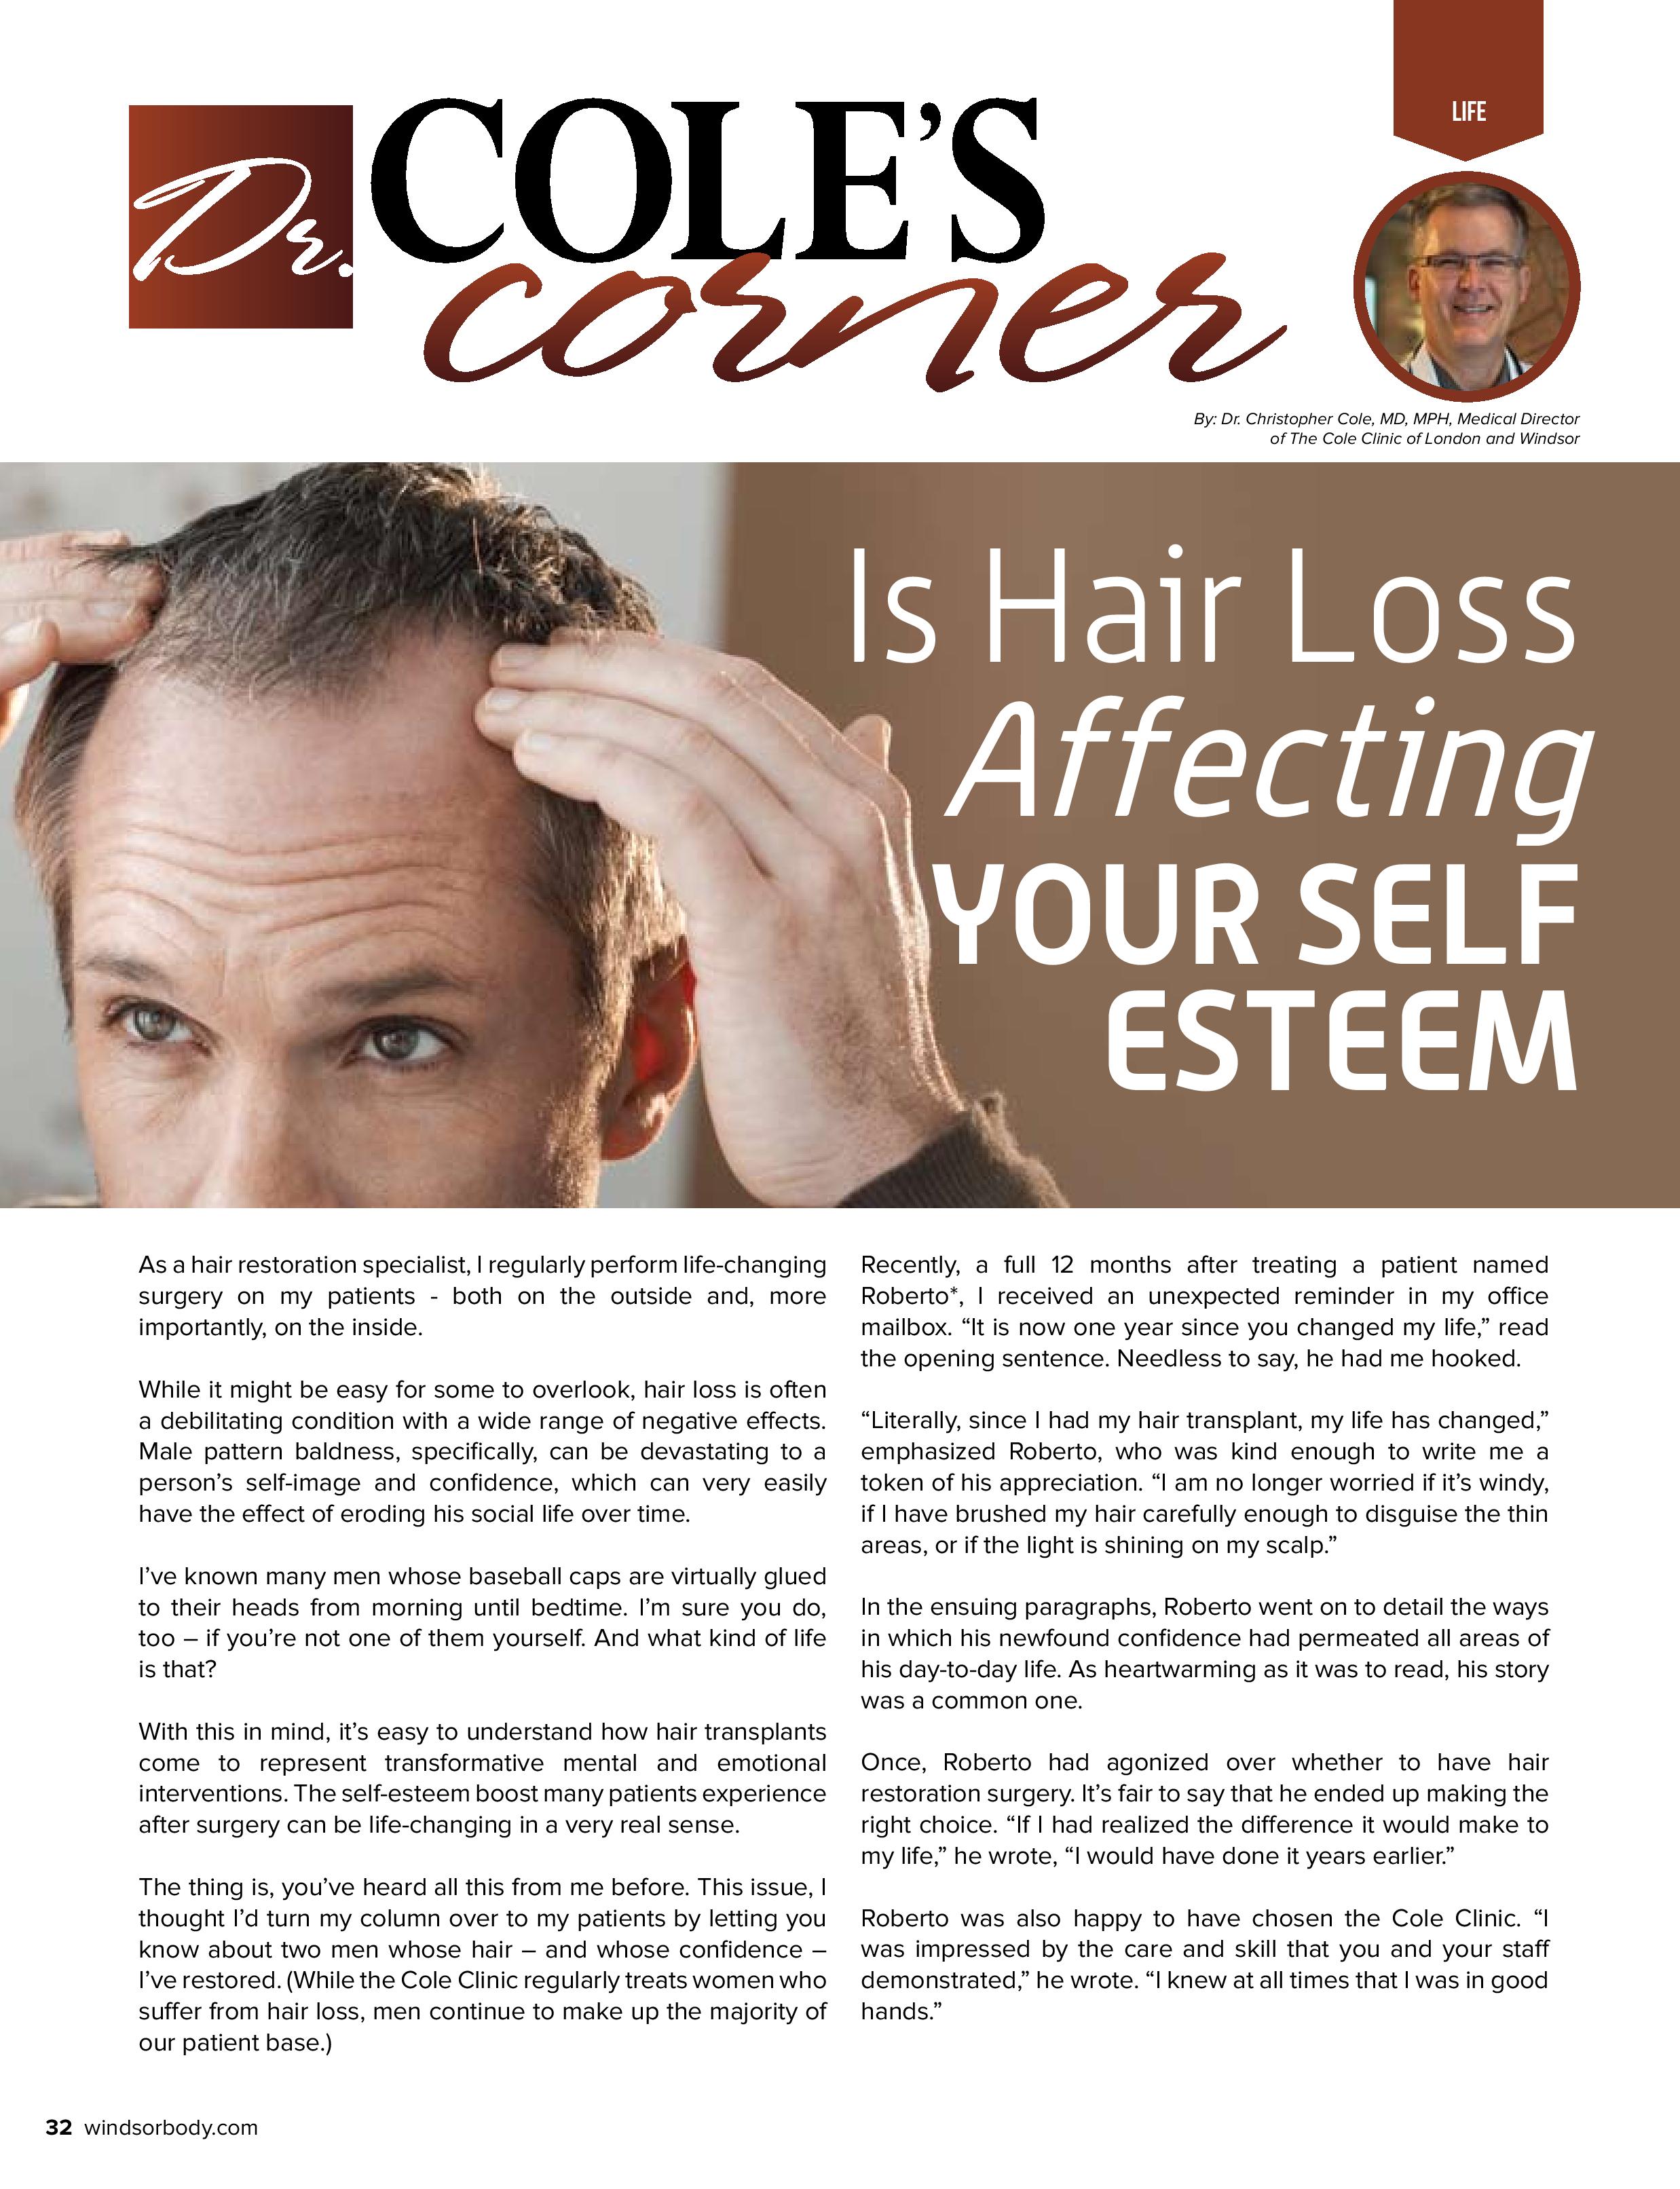 In this article Dr. Cole discusses how hair loss can be devastating to a person's self-image and confidence, and how hair restoration procedures can help.